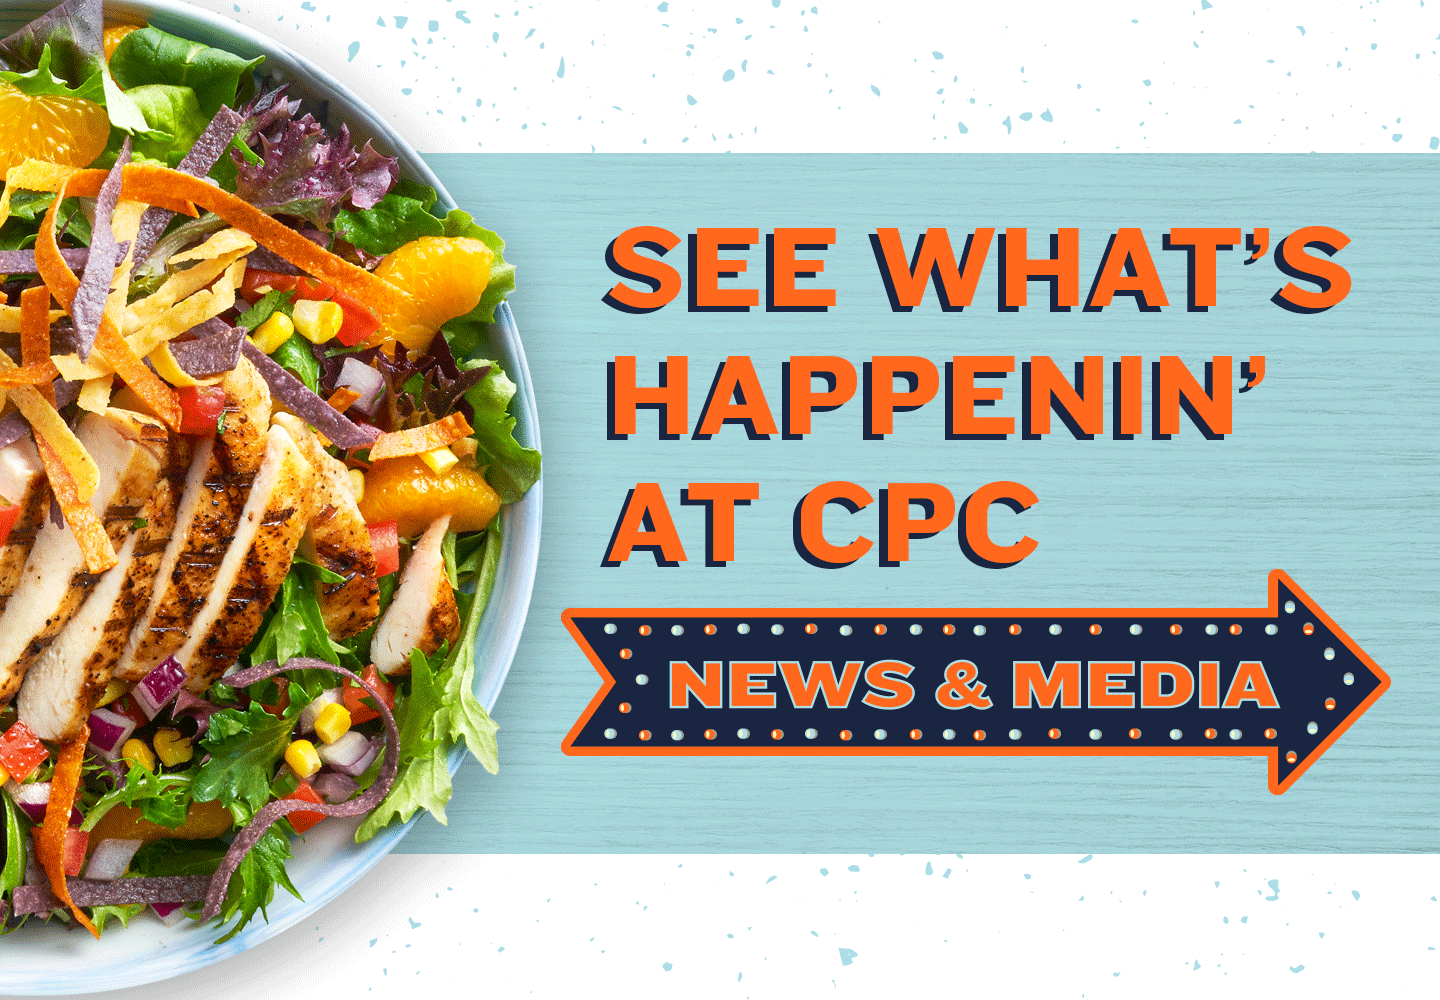 See what's happenin' at CPC!